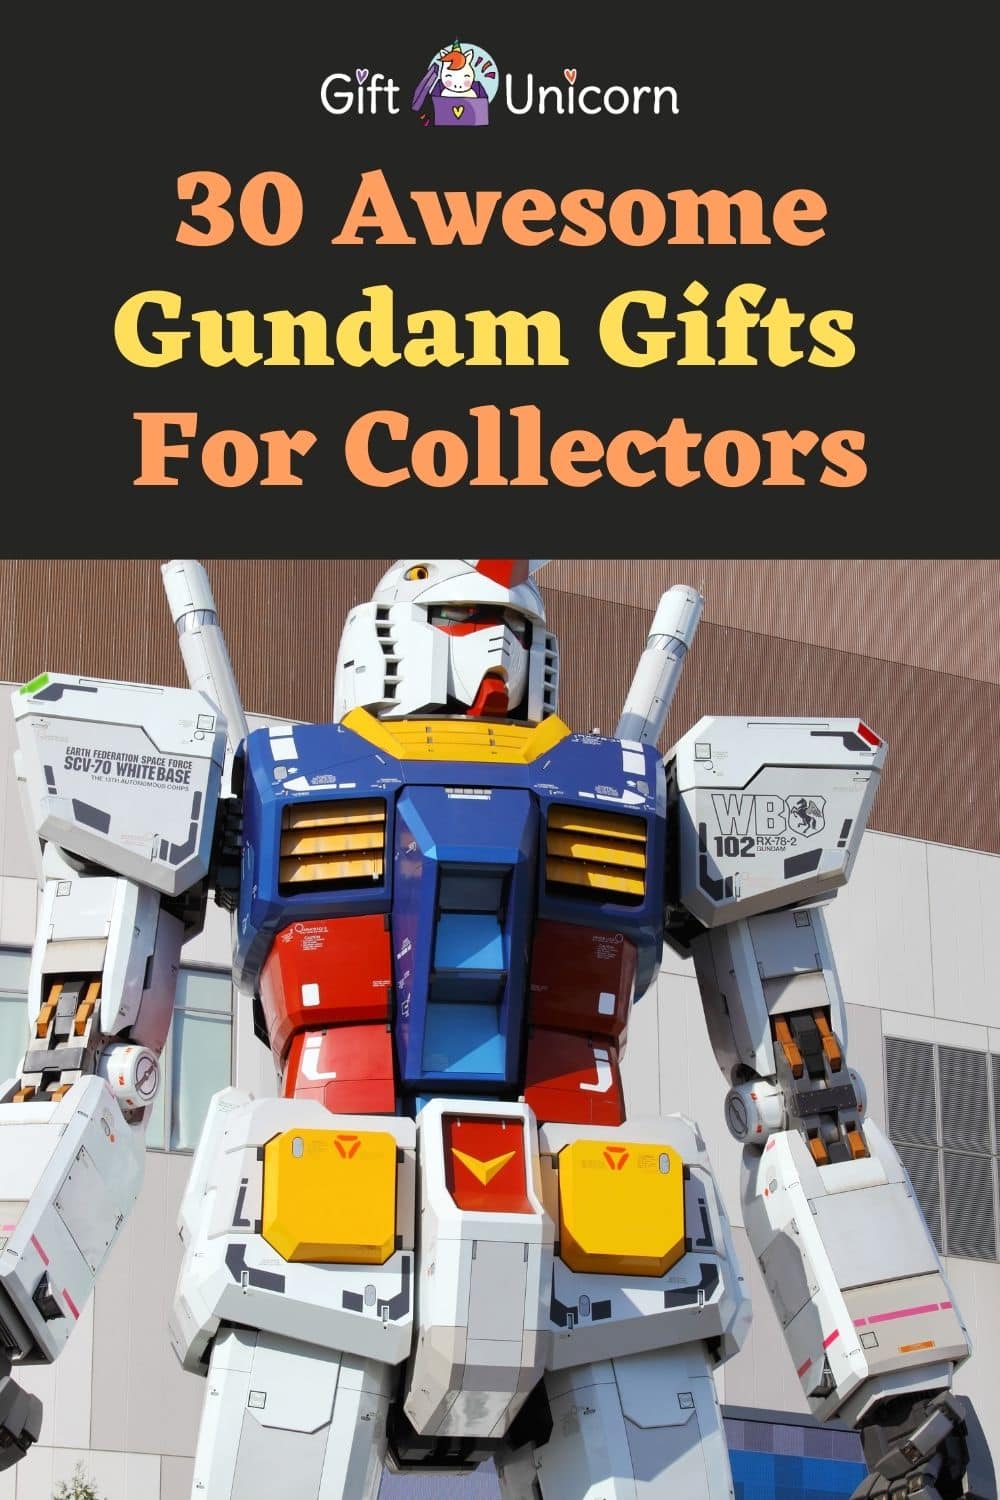 30 Awesome Gundam Gifts For Collectors - pinterest pin image